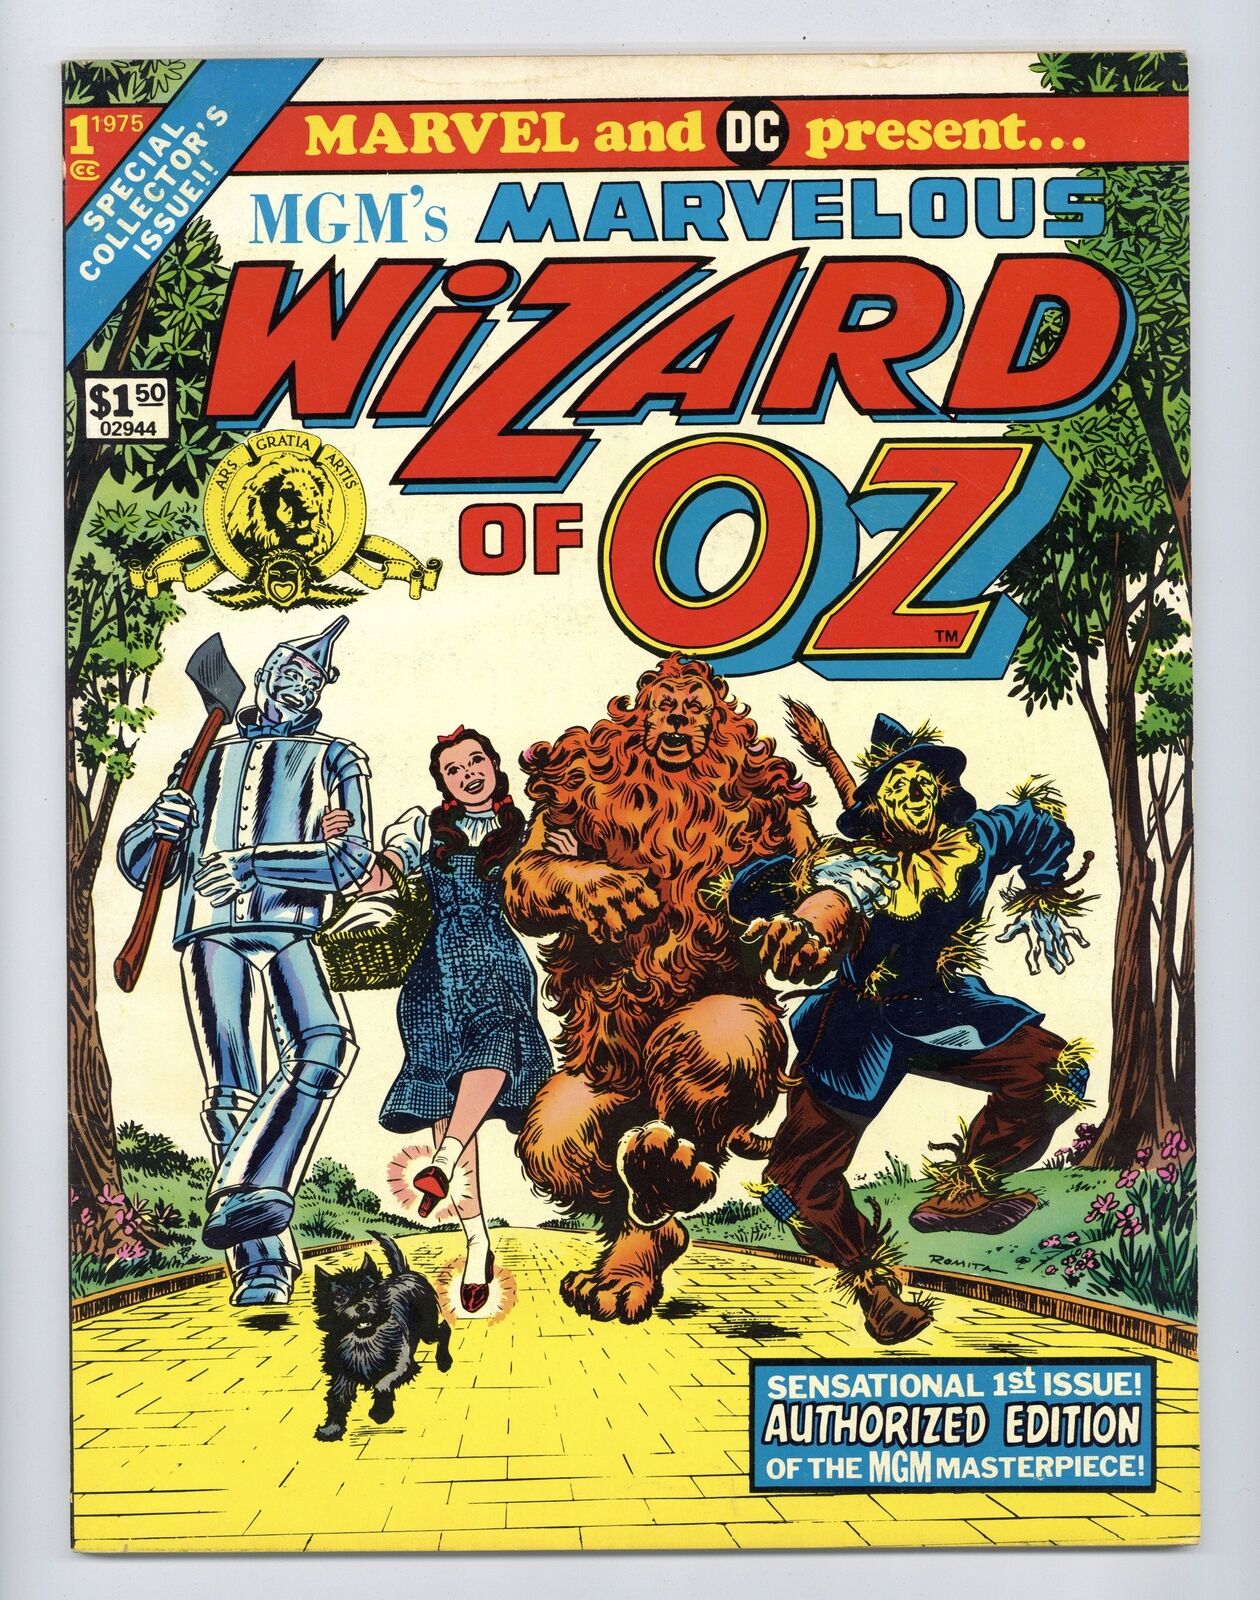 Marvelous Wizard of Oz #1 VG+ 4.5 1975